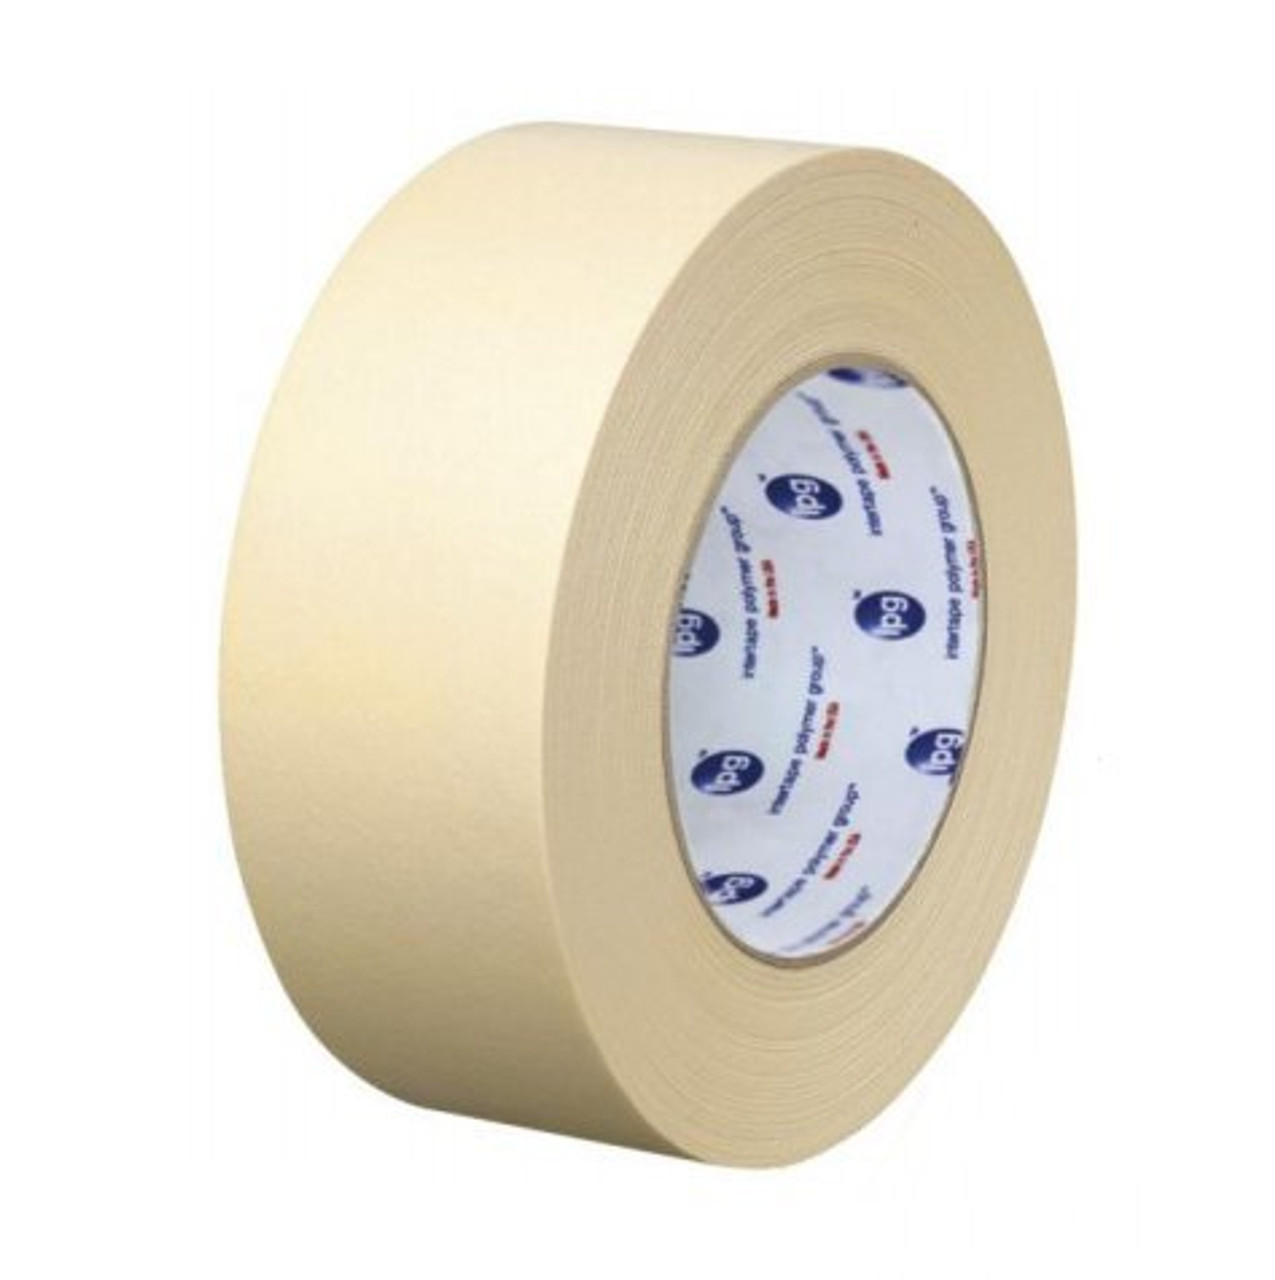 Ogi General Purpose Masking Tape for Production Painting, 0.94-Inch by 60-Yard, 9-Pack